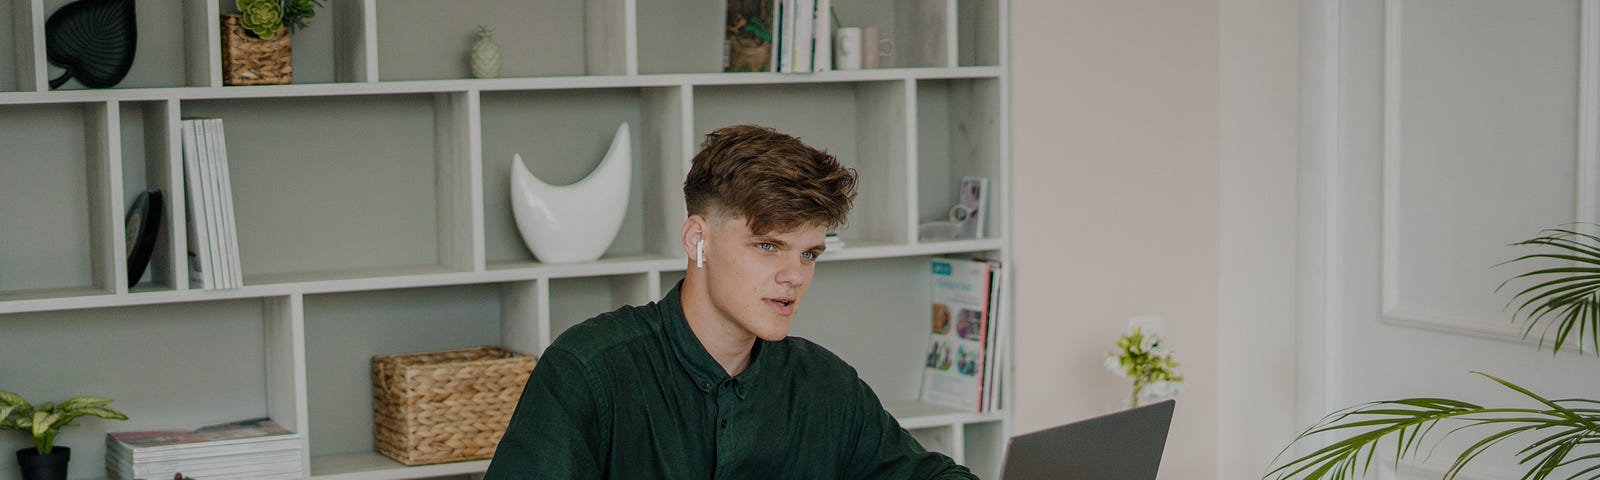 Man with airpods working at his desk